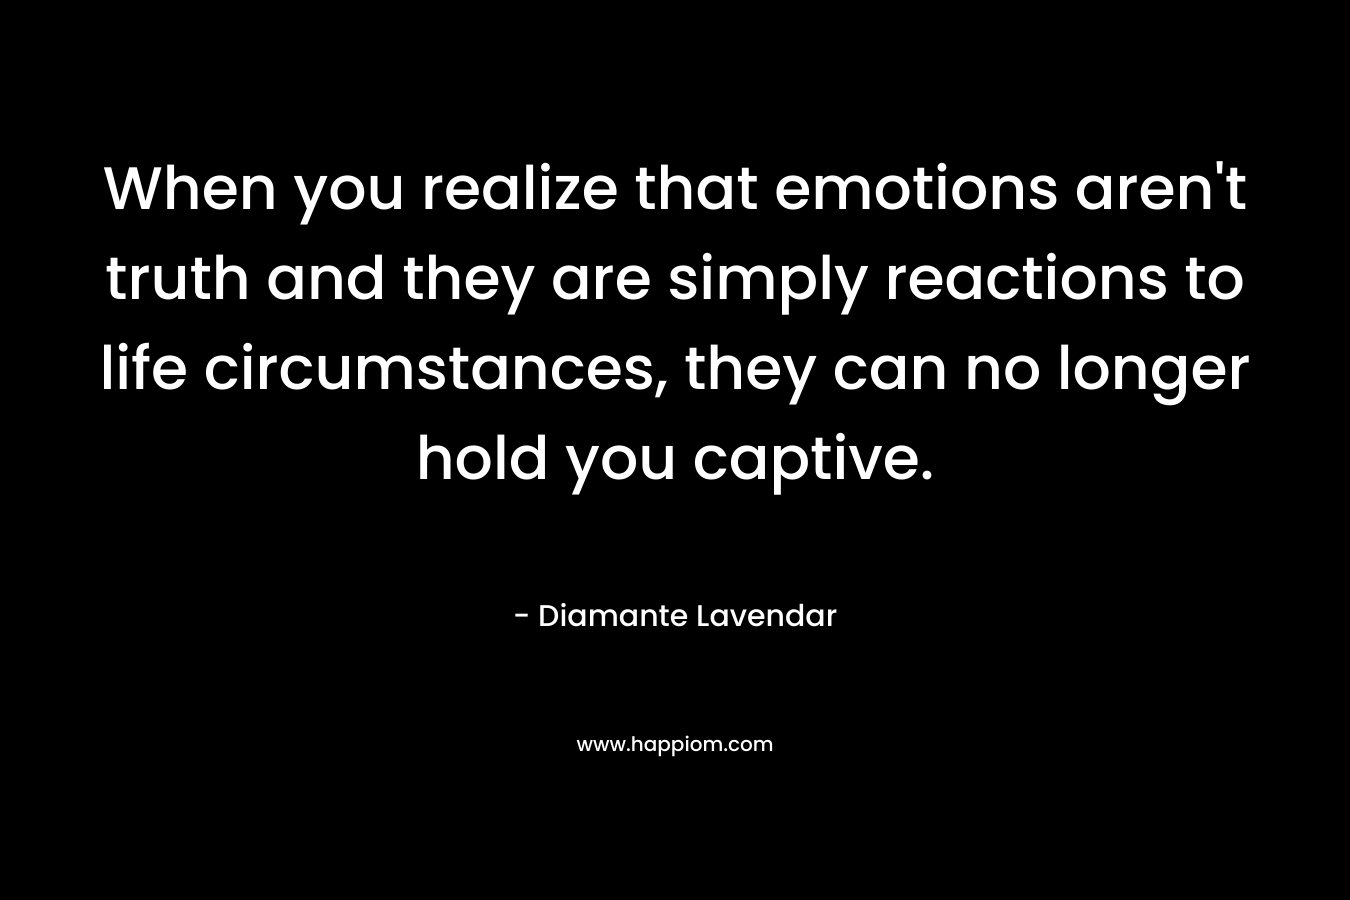 When you realize that emotions aren't truth and they are simply reactions to life circumstances, they can no longer hold you captive.